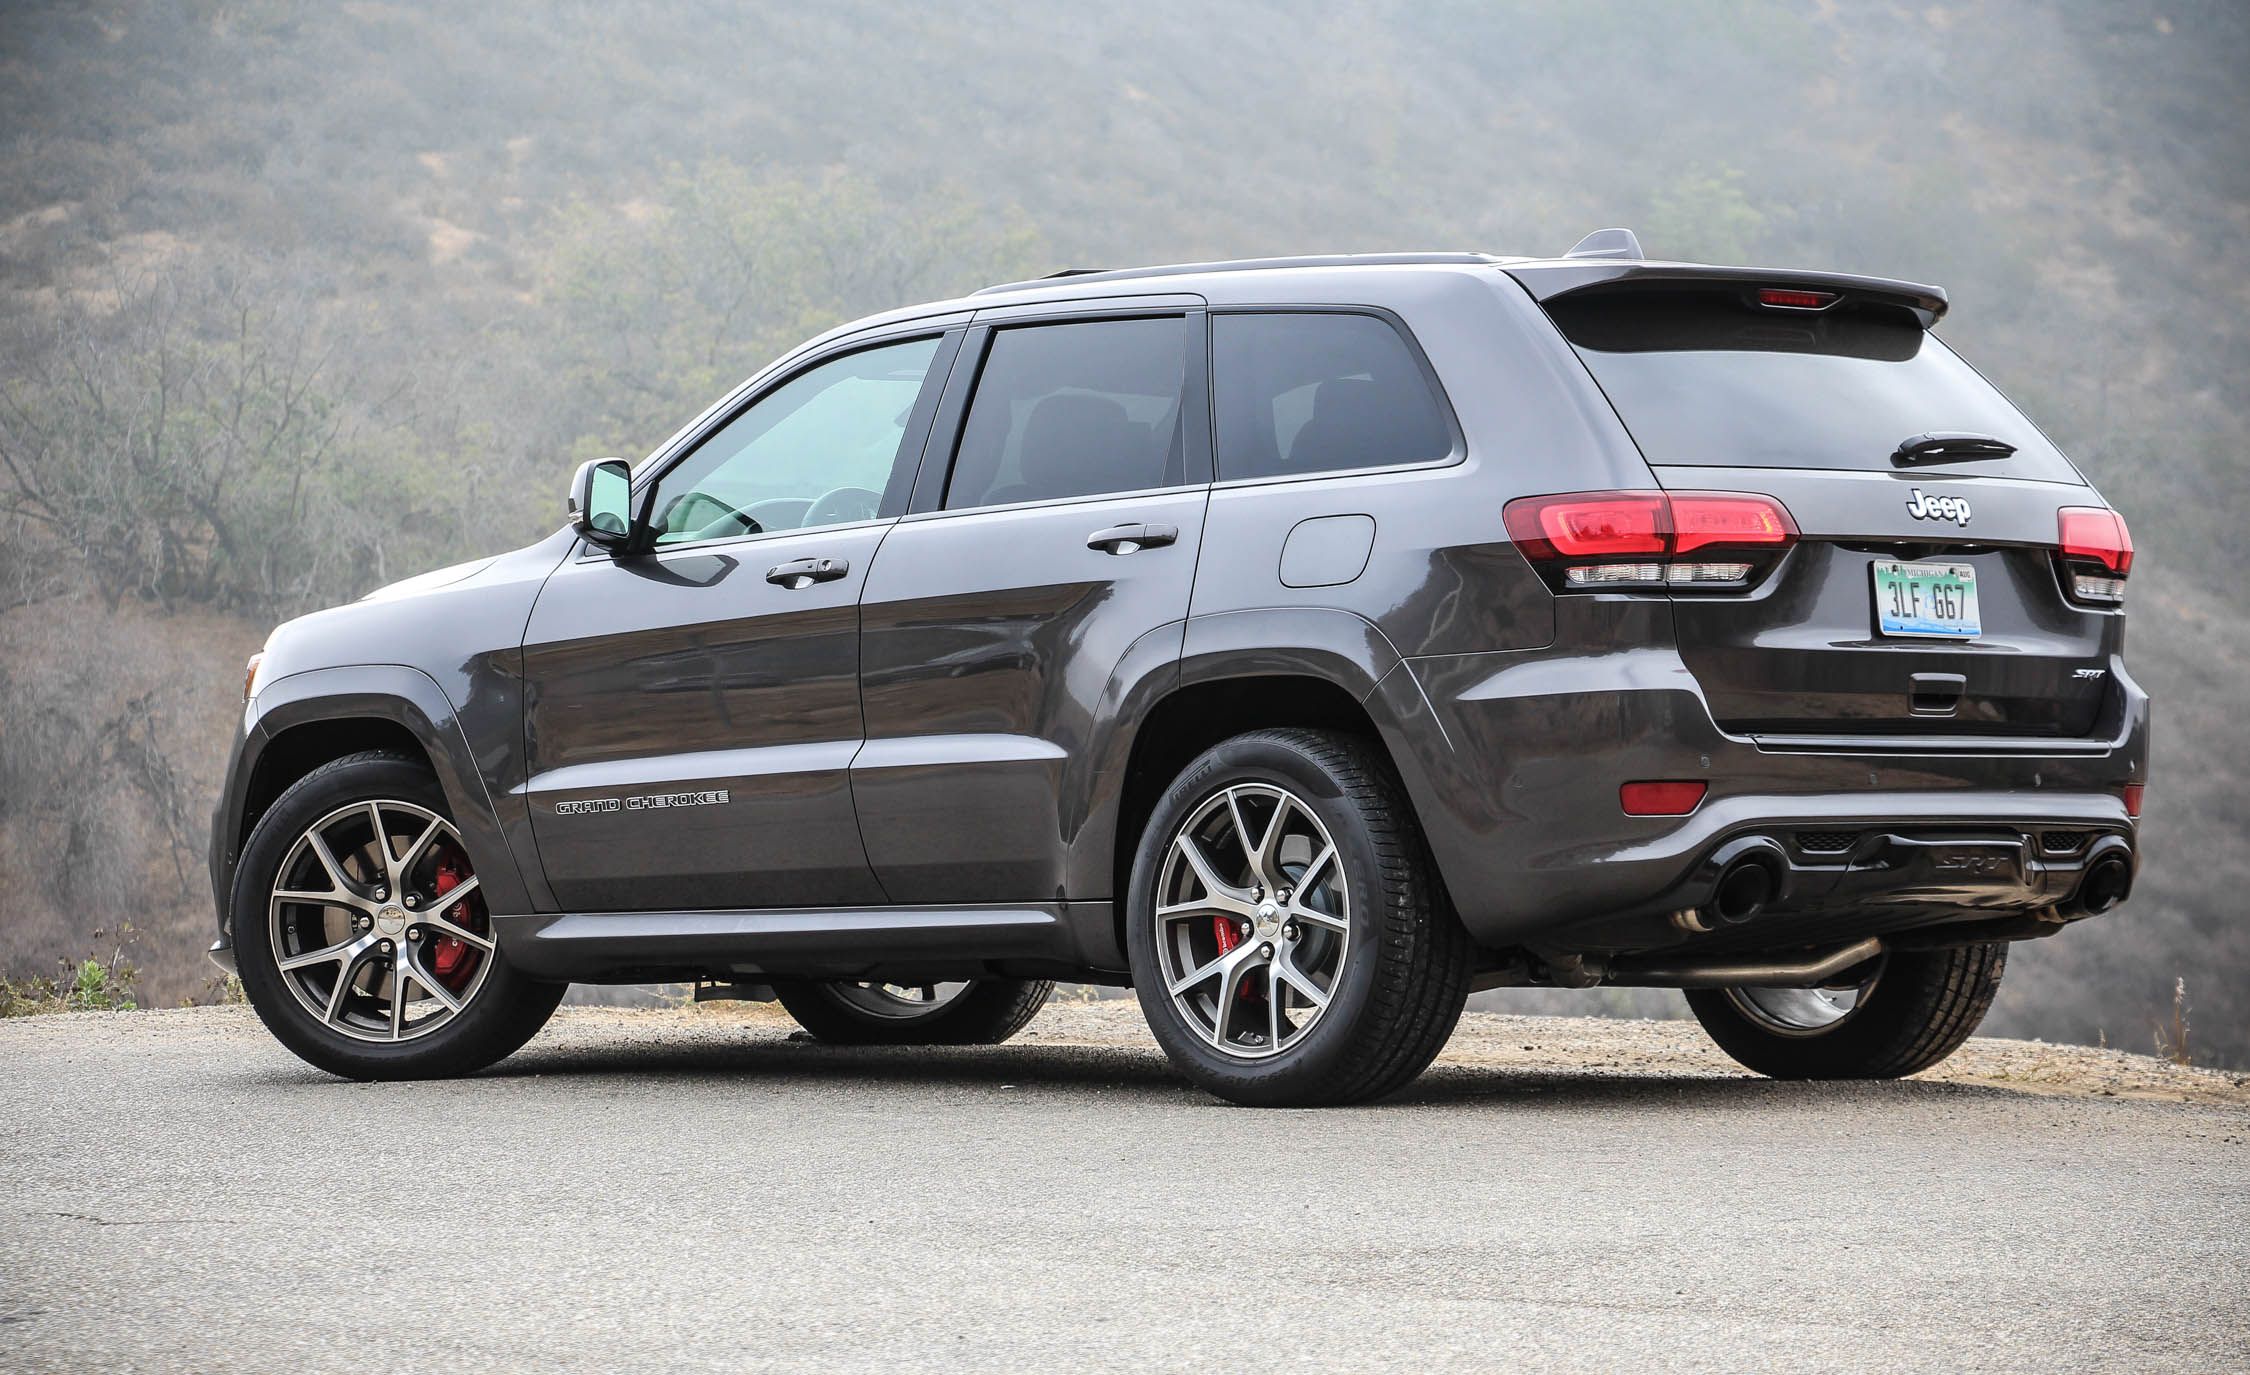 2019 Jeep Grand Cherokee SRT Review, Pricing, and Specs